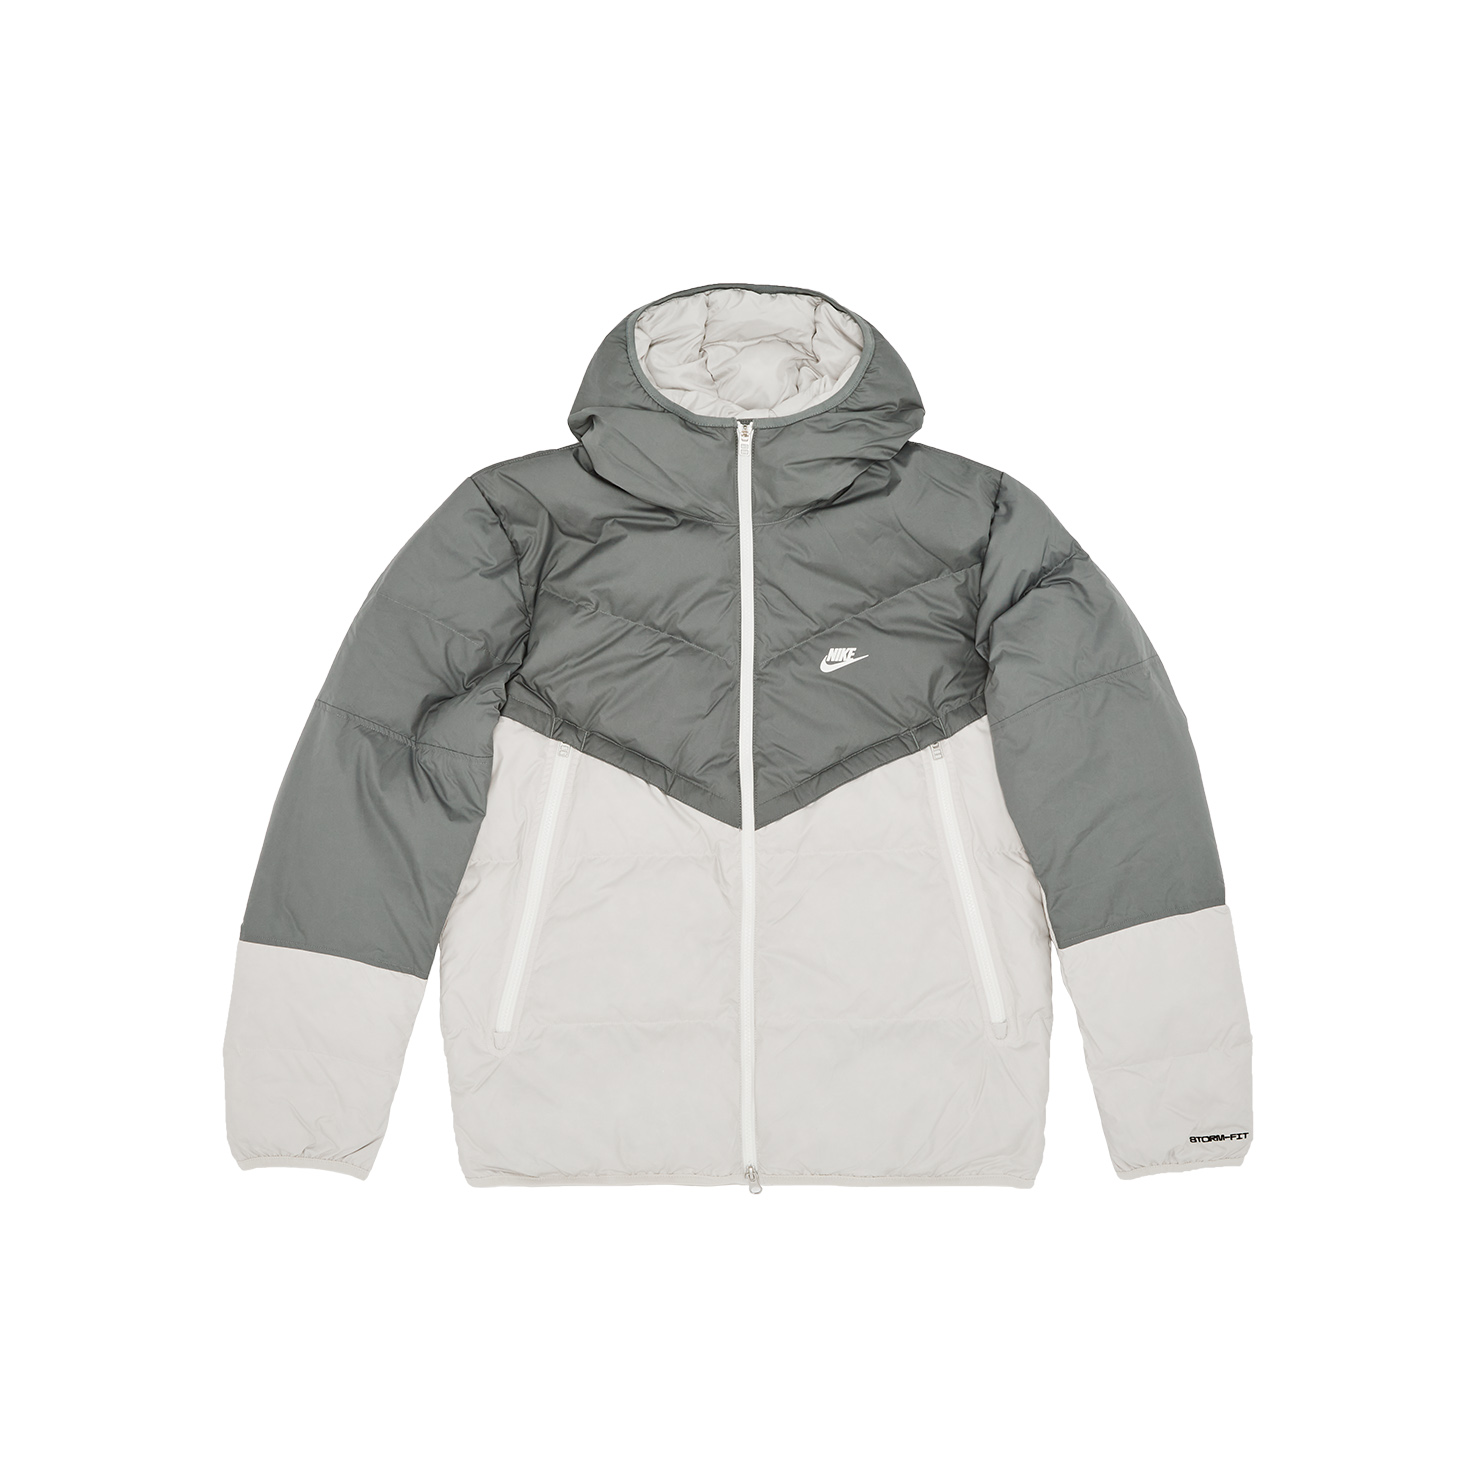 STORM-FIT WINDRUNNER PUFFER NIKE серого цвета